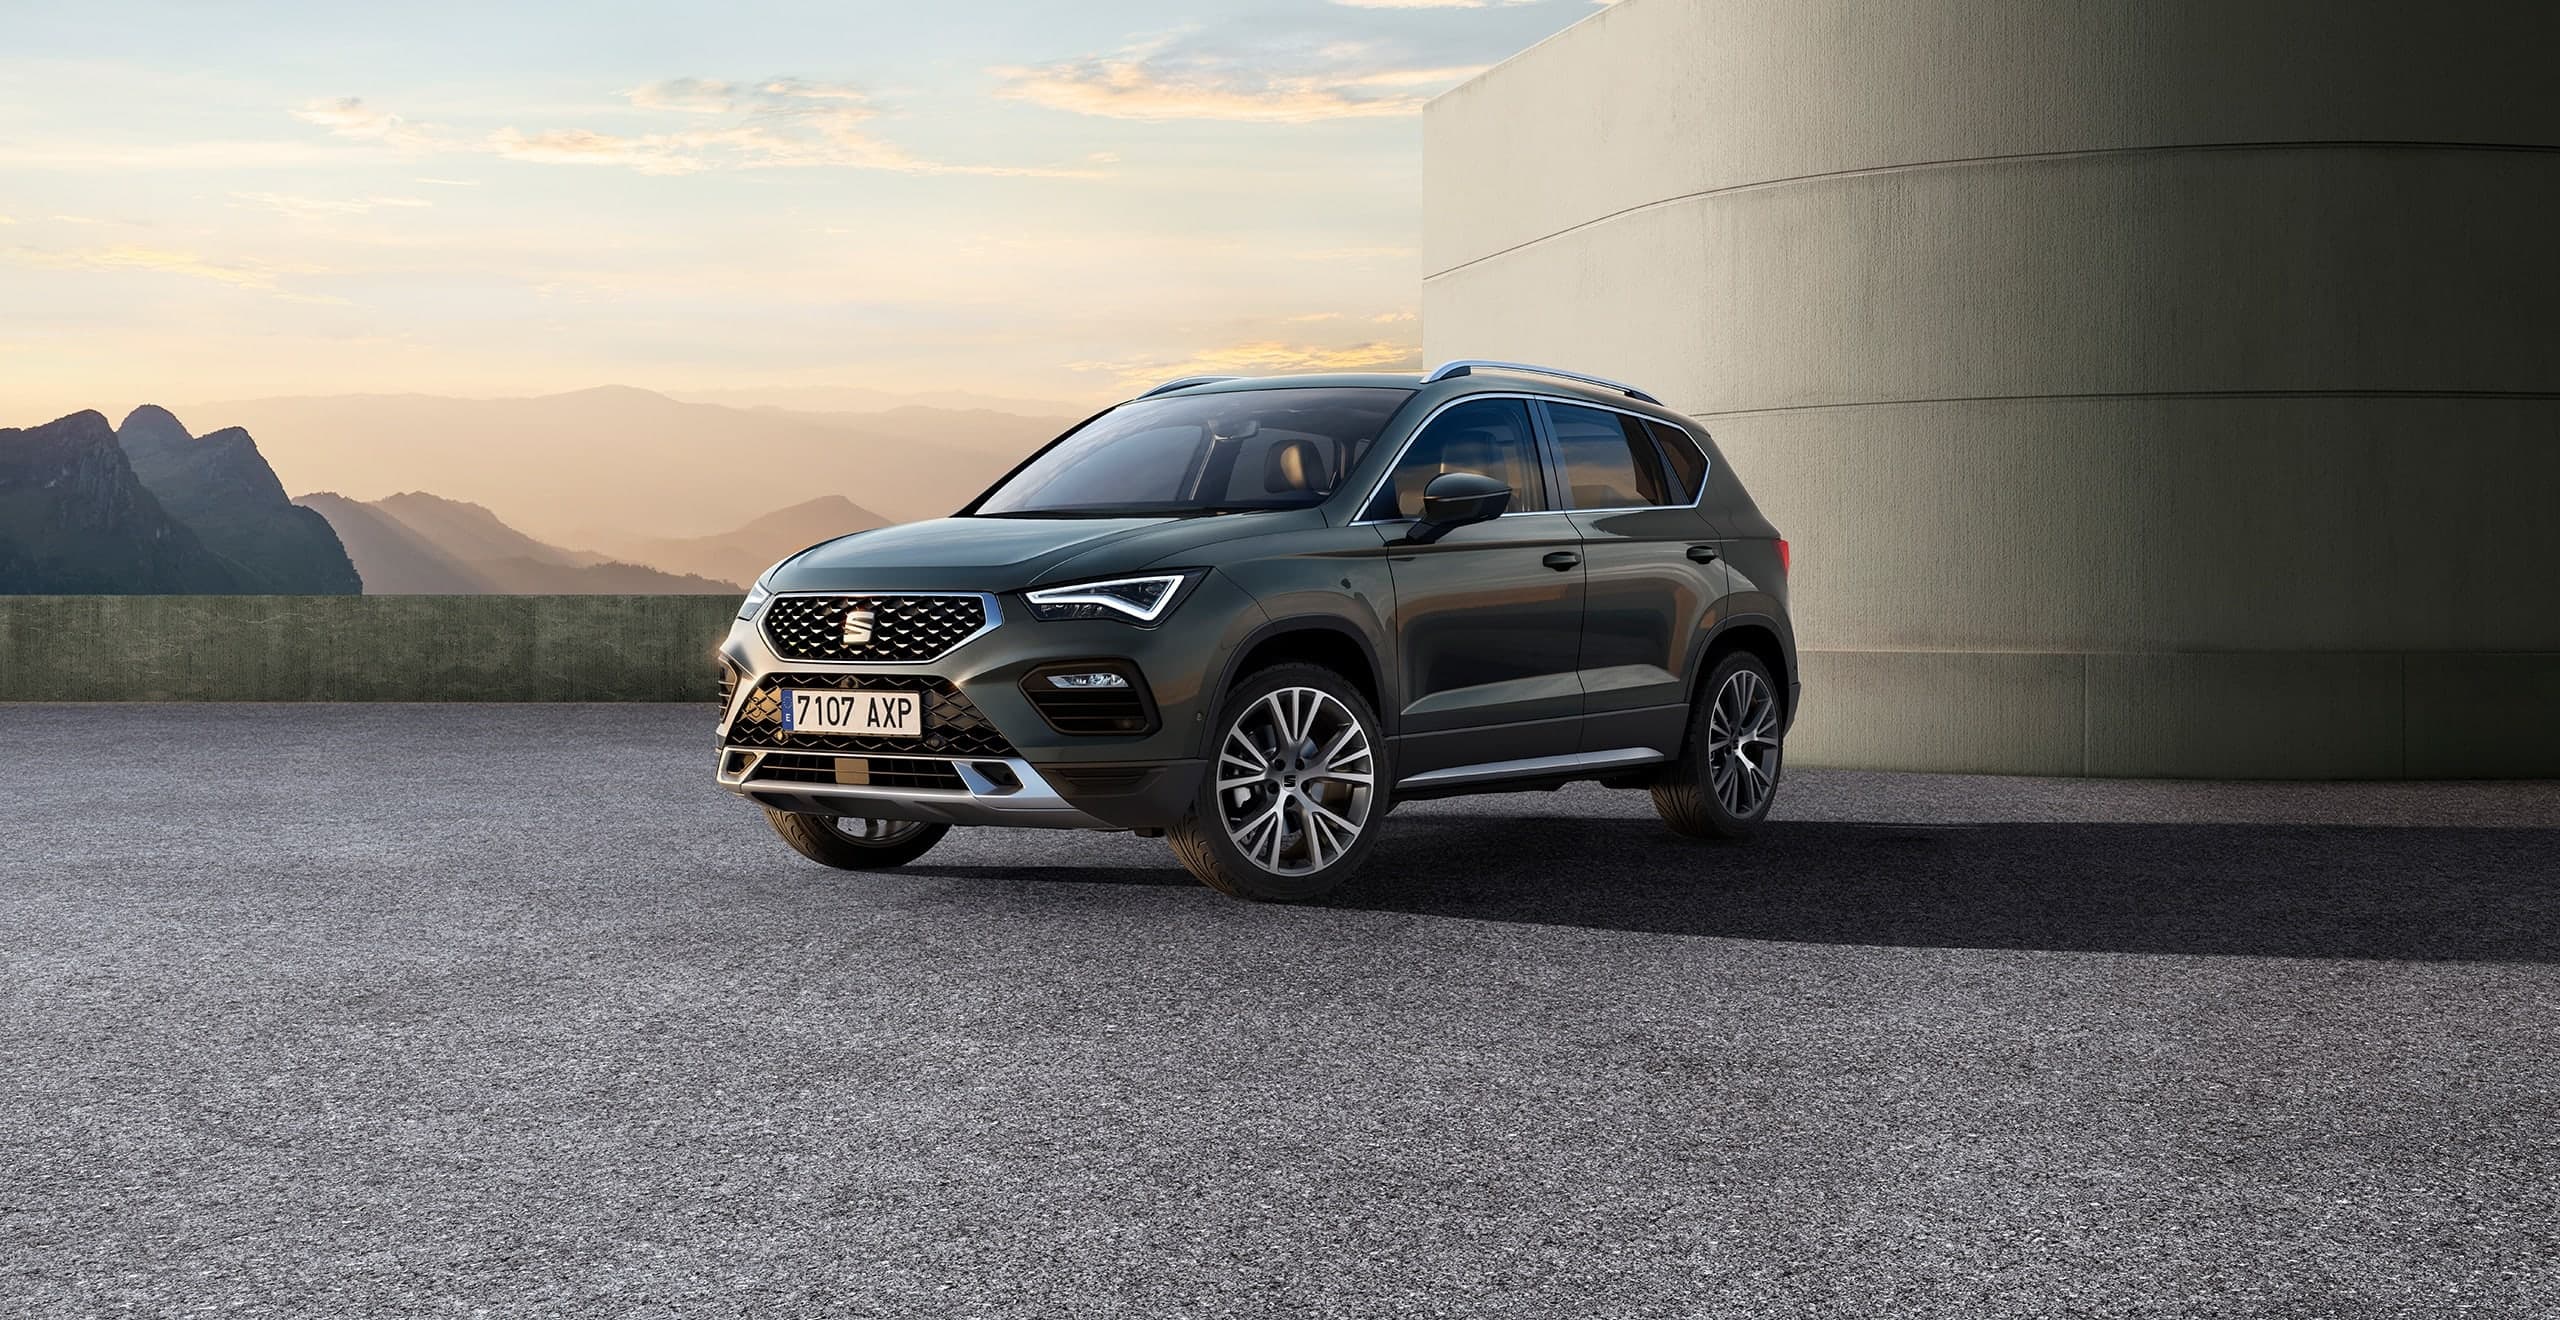 SEAT ATECA SUV vue laterale arriere